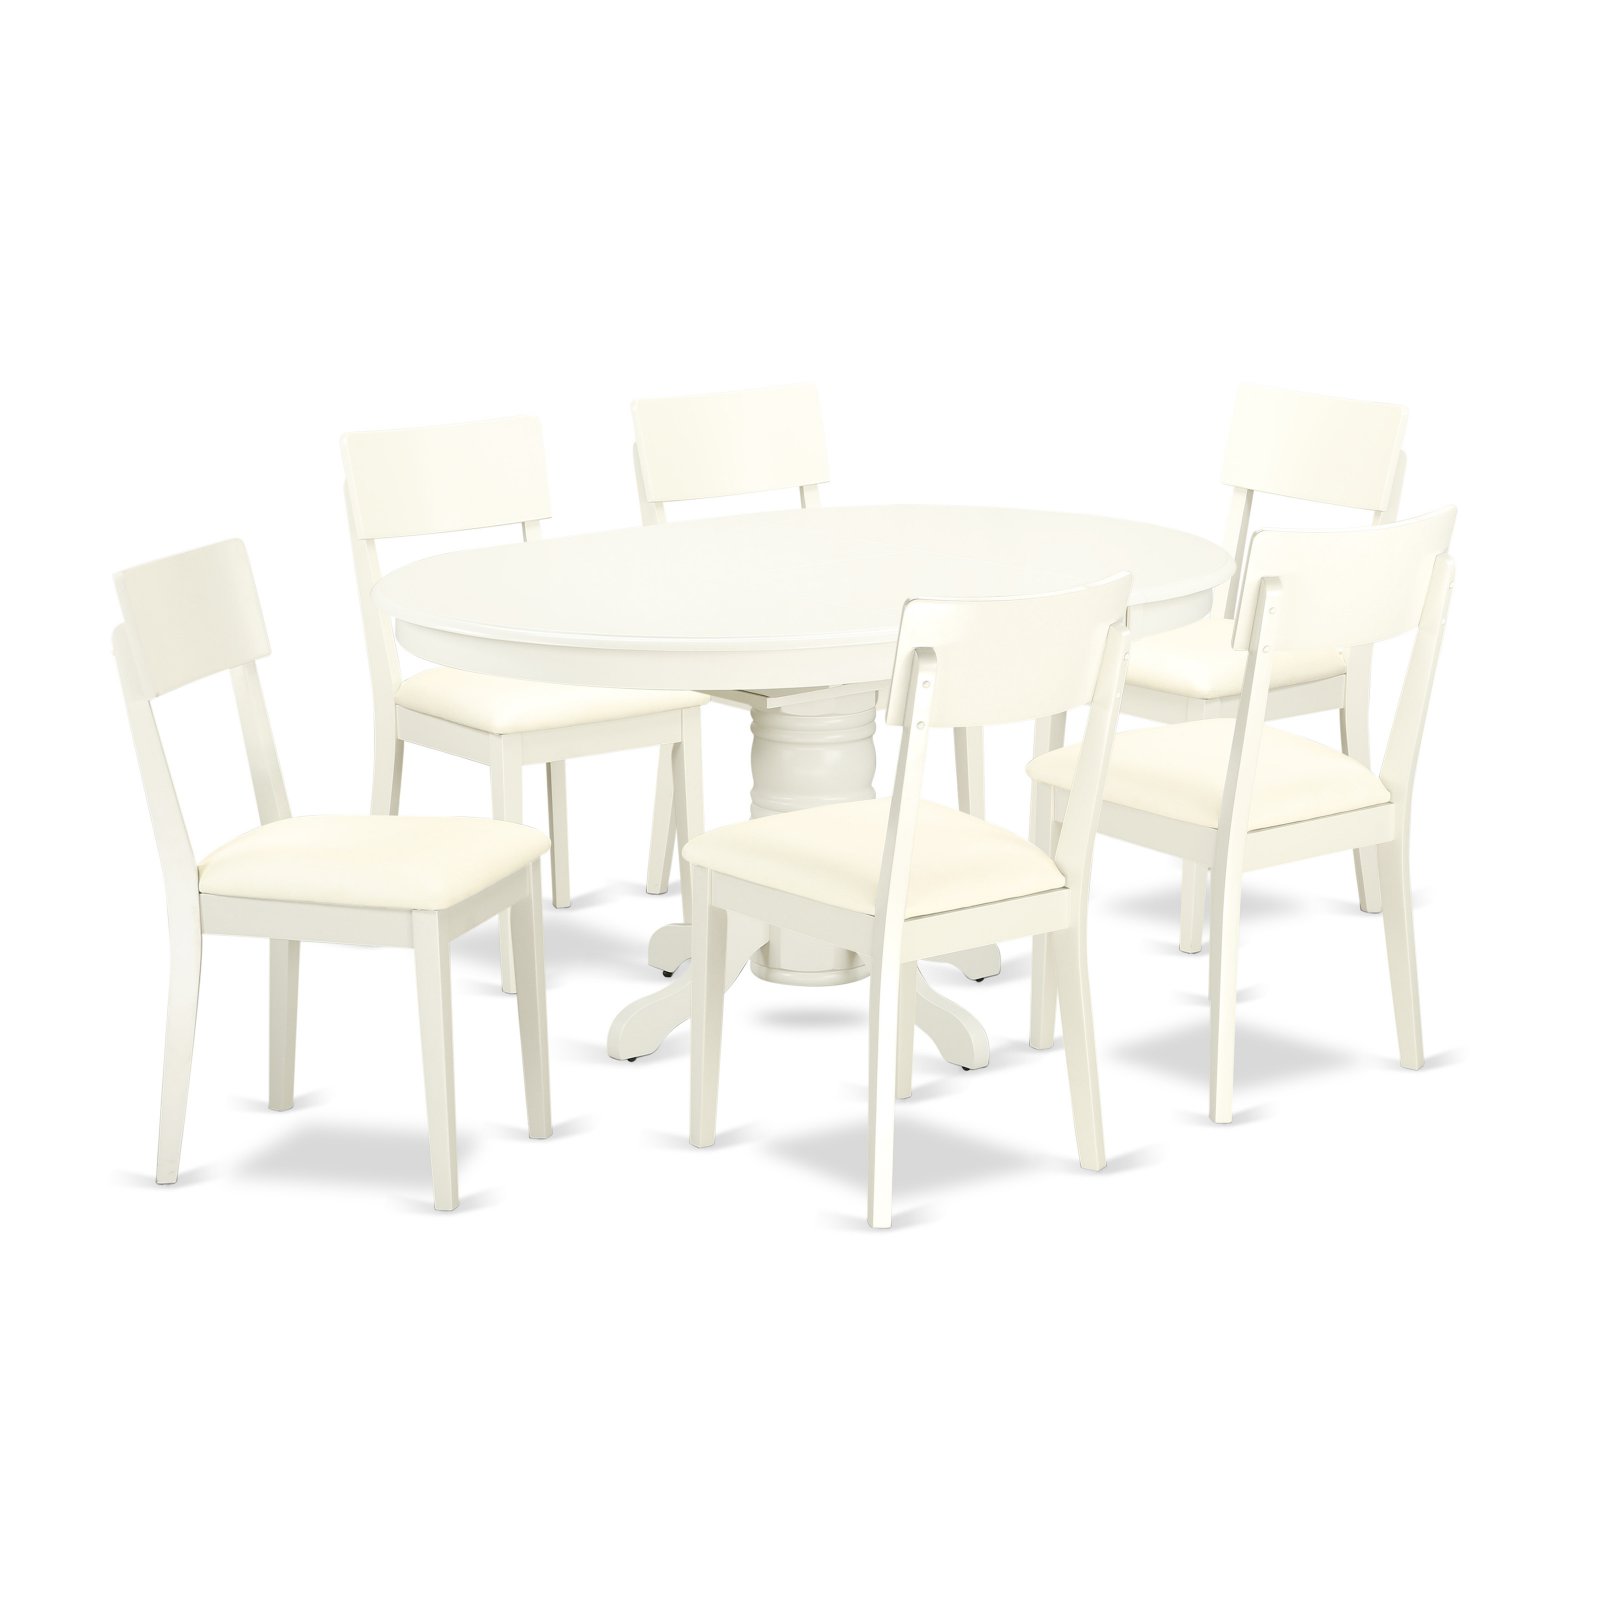 East West Furniture Avon 7-piece Wood Dining Set with Leather Seat in White - image 1 of 5